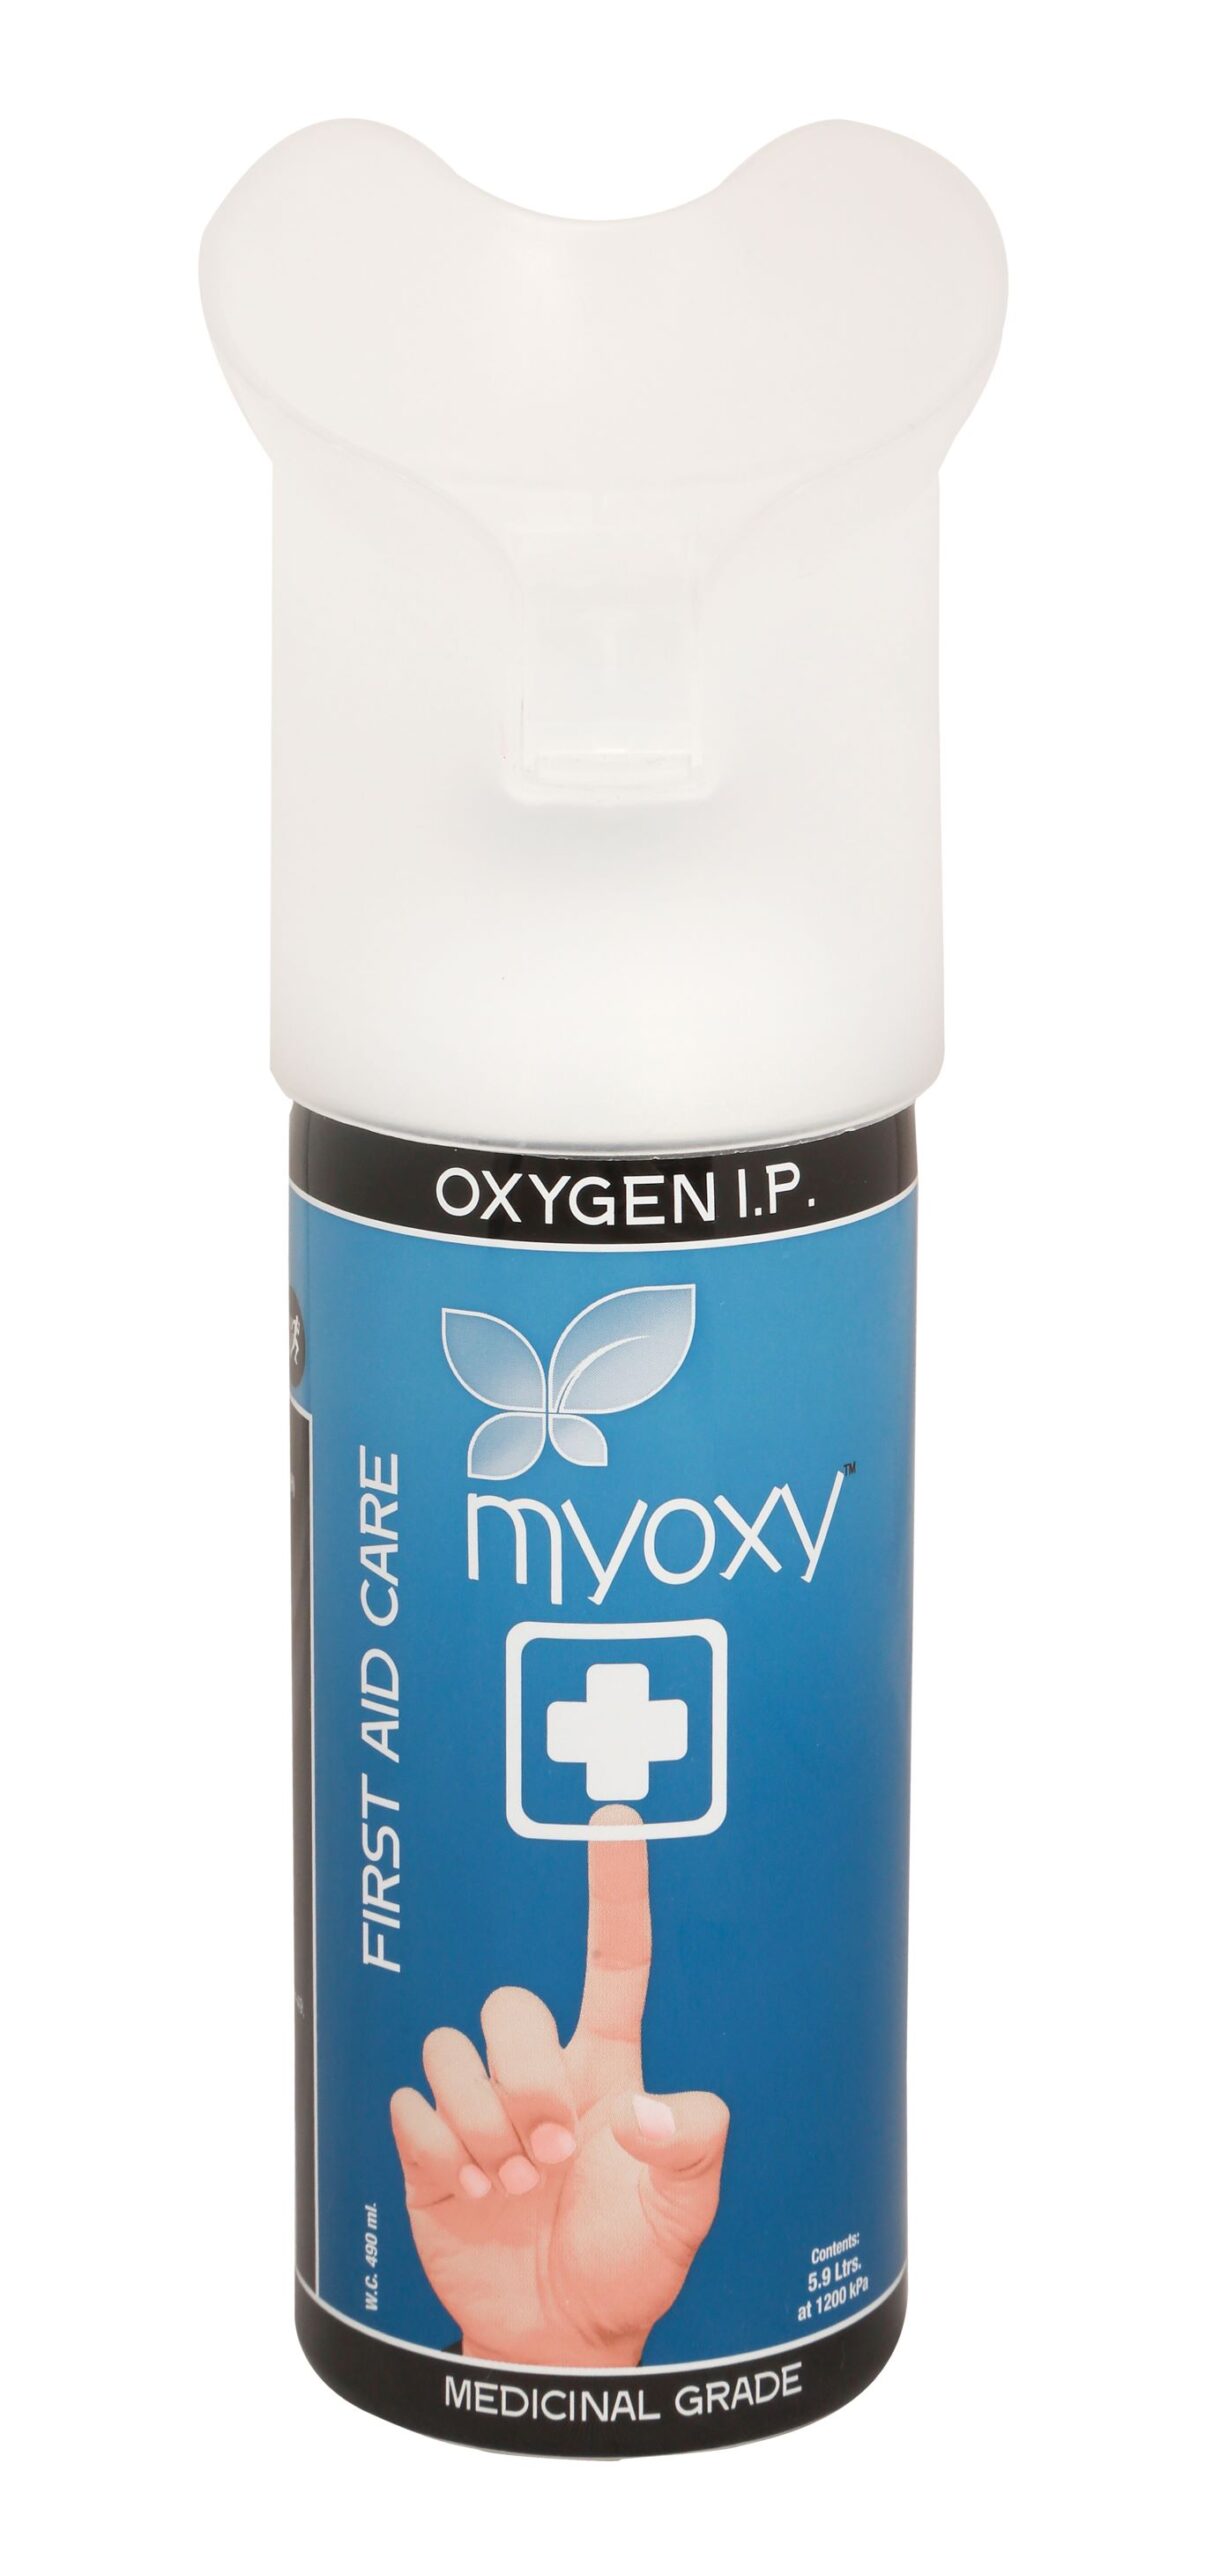 MyOxy personal portable oxygen can image